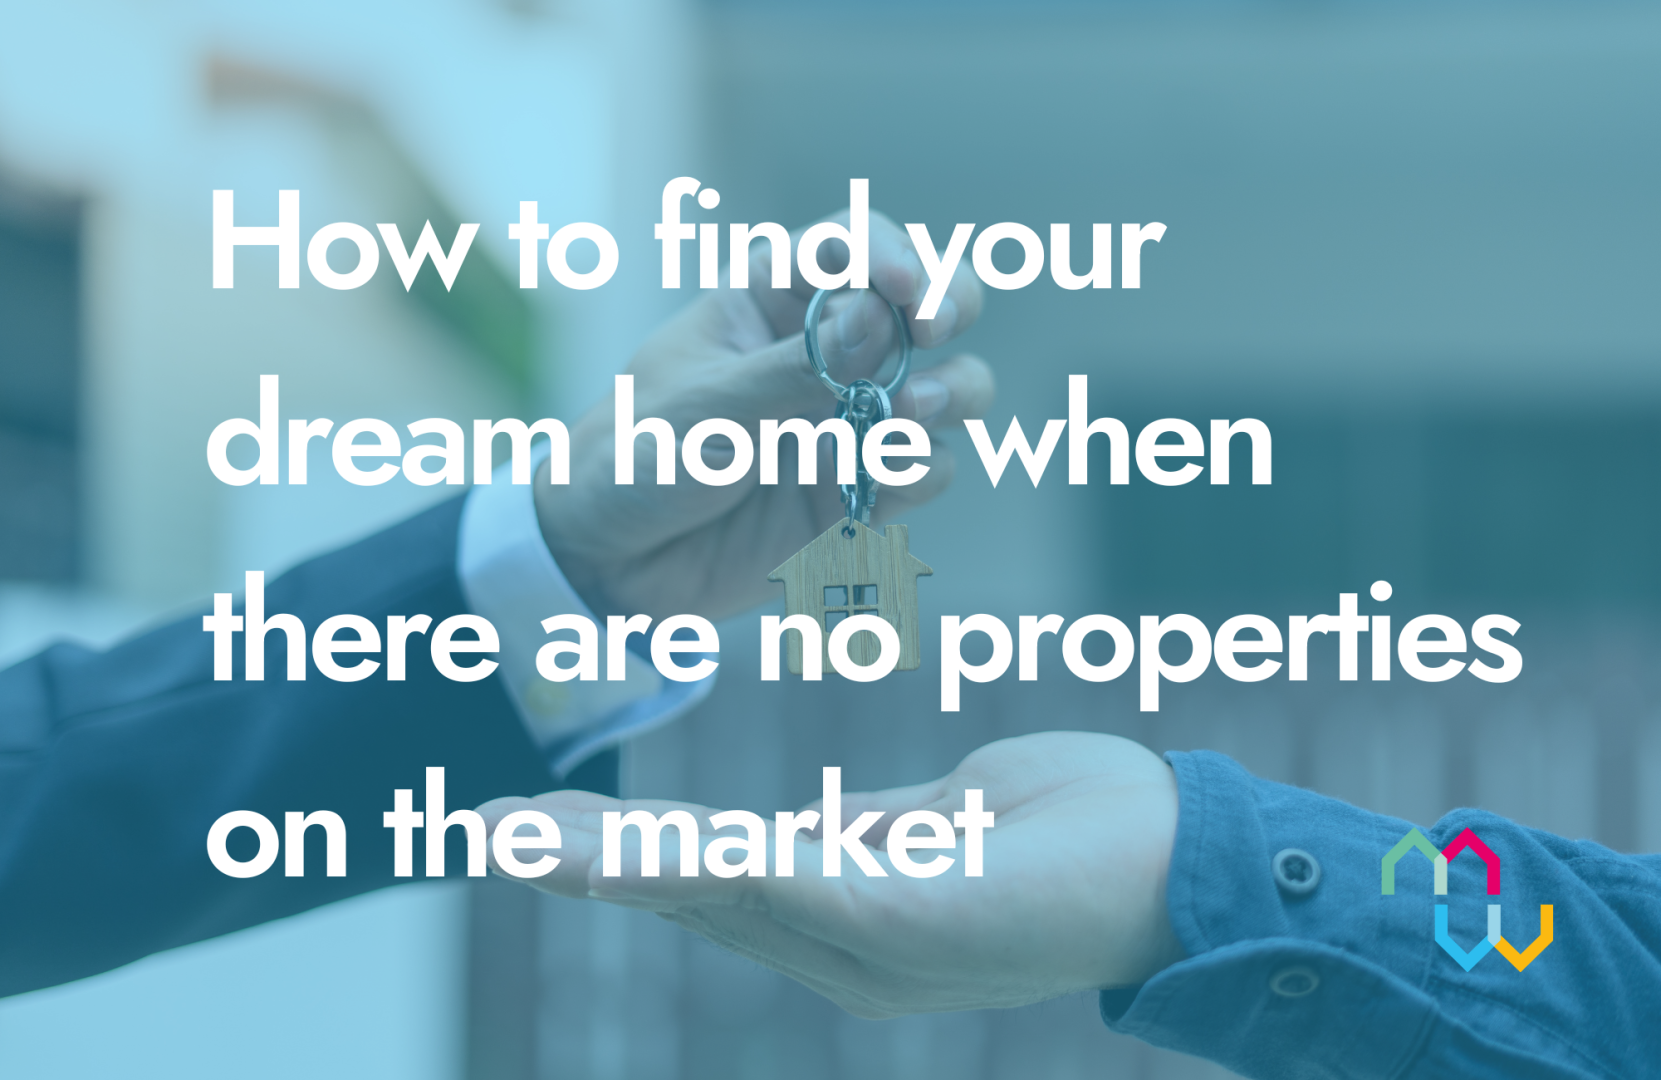 How to find your dream home